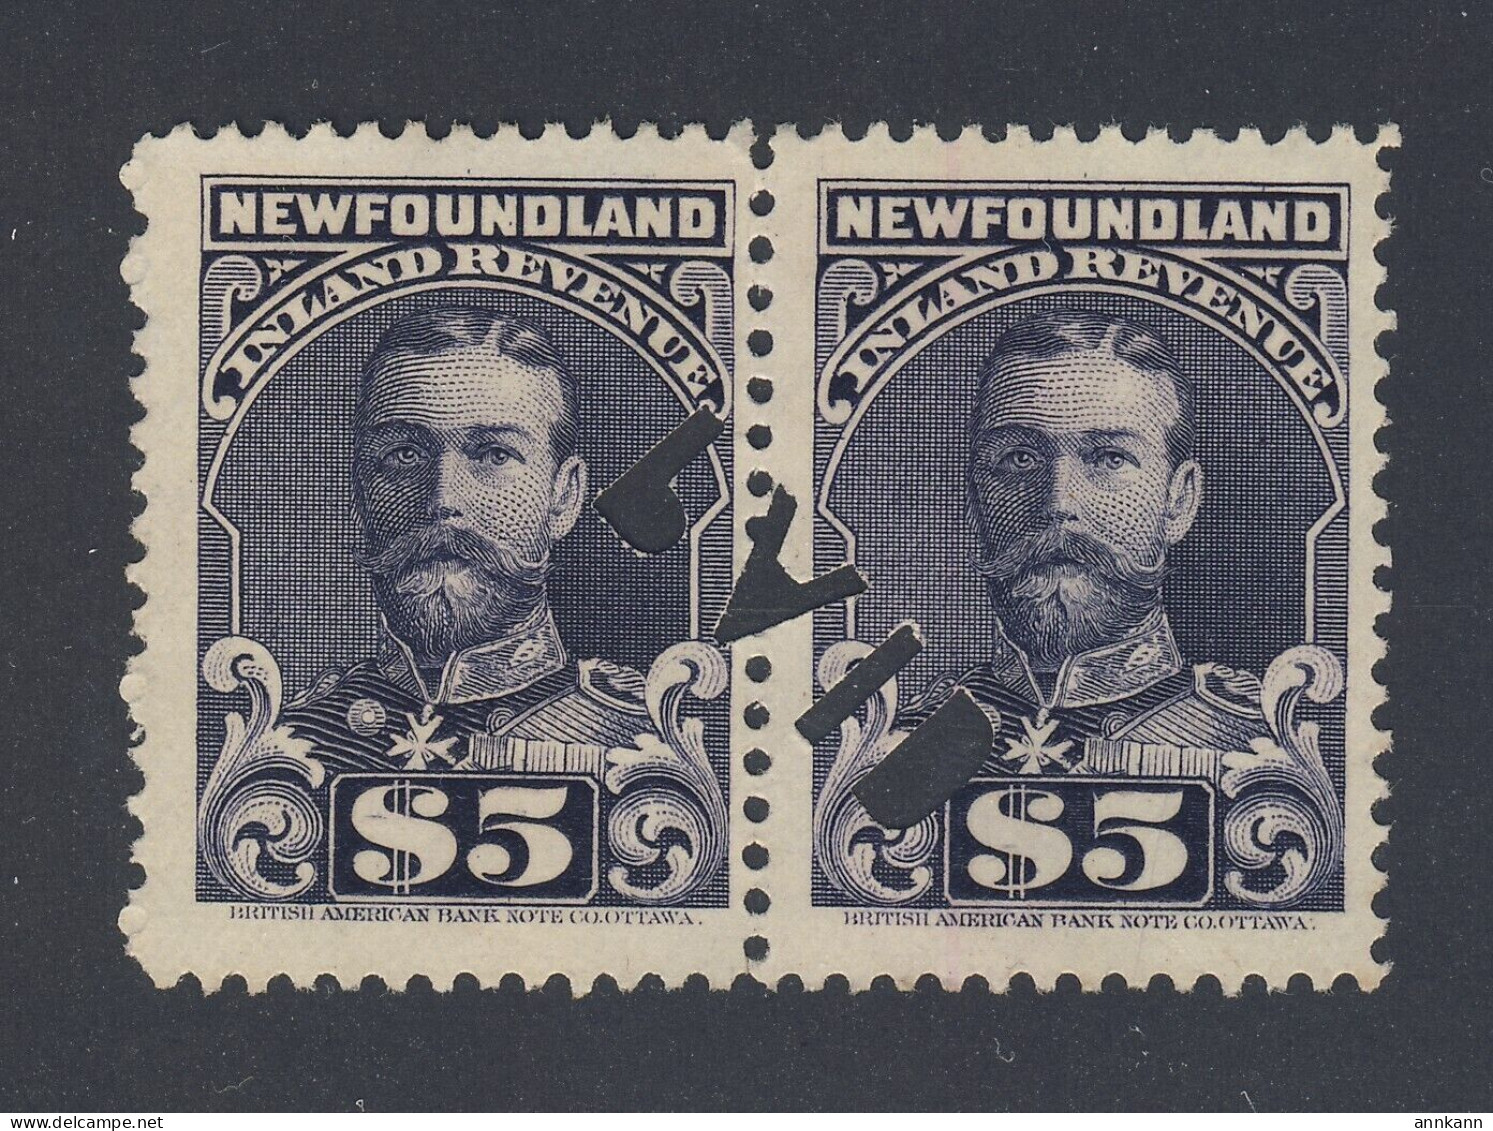 2x Newfoundland George V Revenue Stamps; Pair #NFR21-$5.00 Perf 11 GV= $150.00 - Fiscales